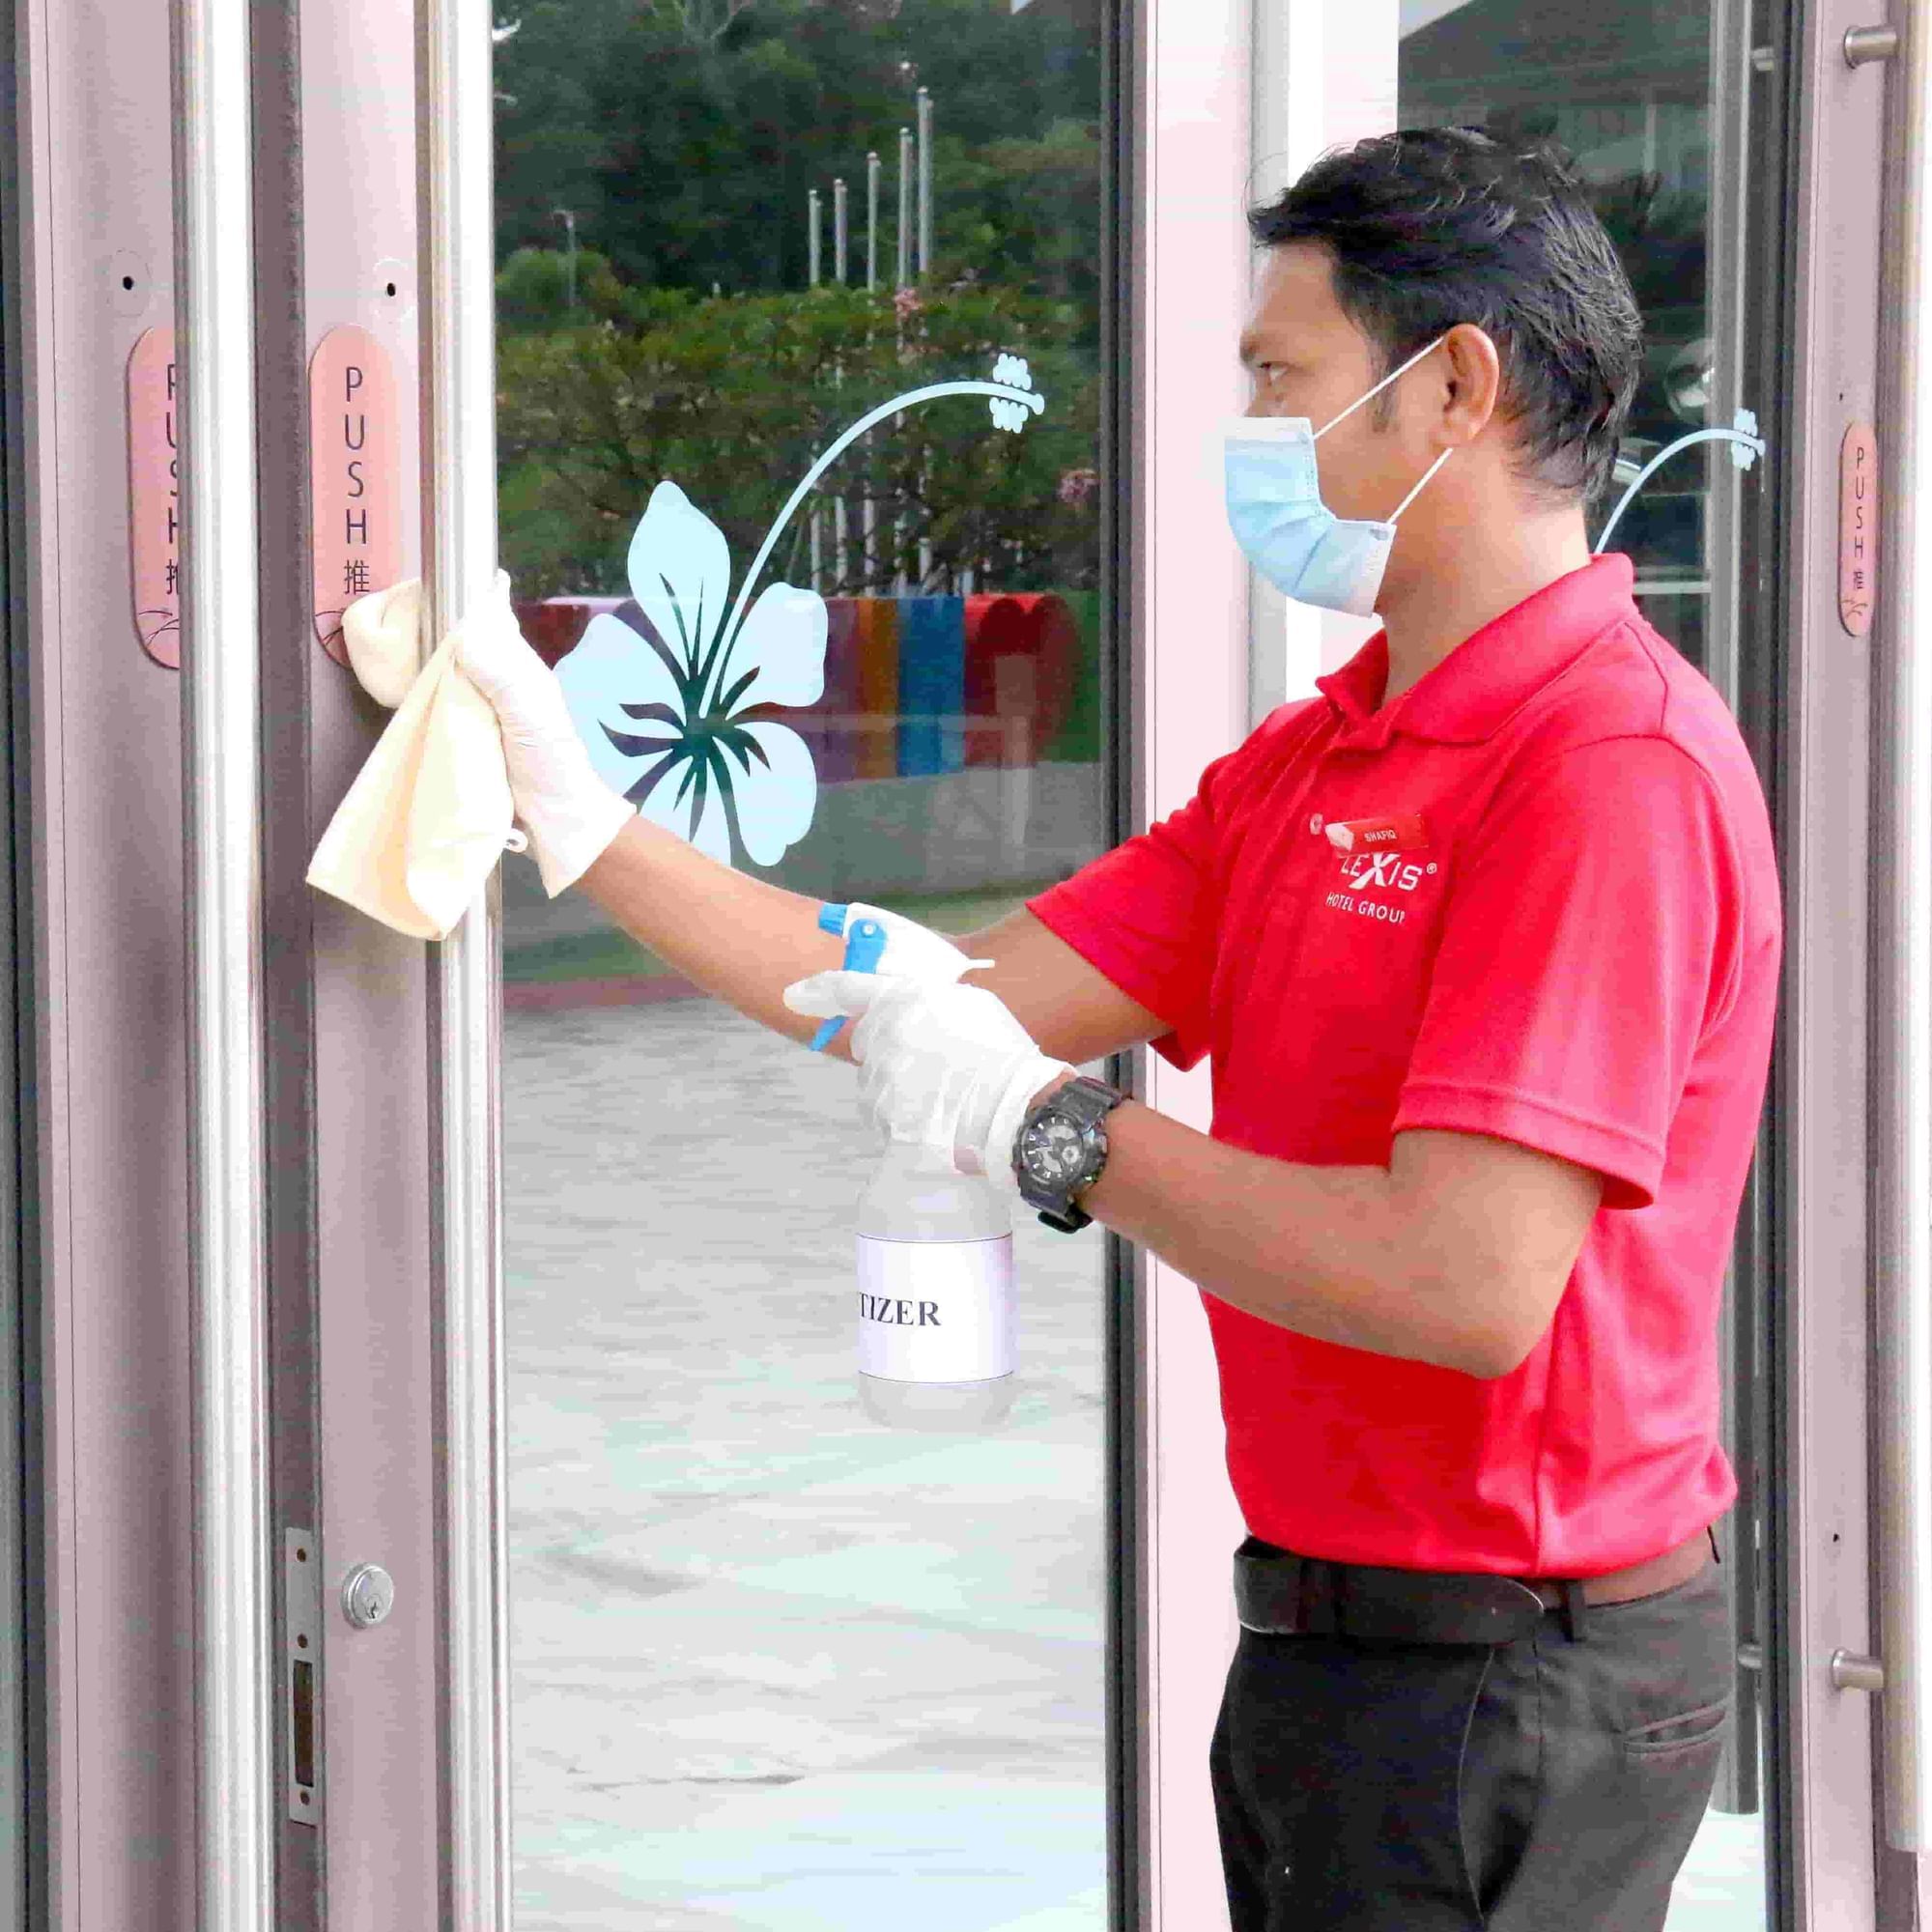 News 2020 - Enhance Cleaning Protocols During MCO | Lexis Hibiscus® Port Dickson